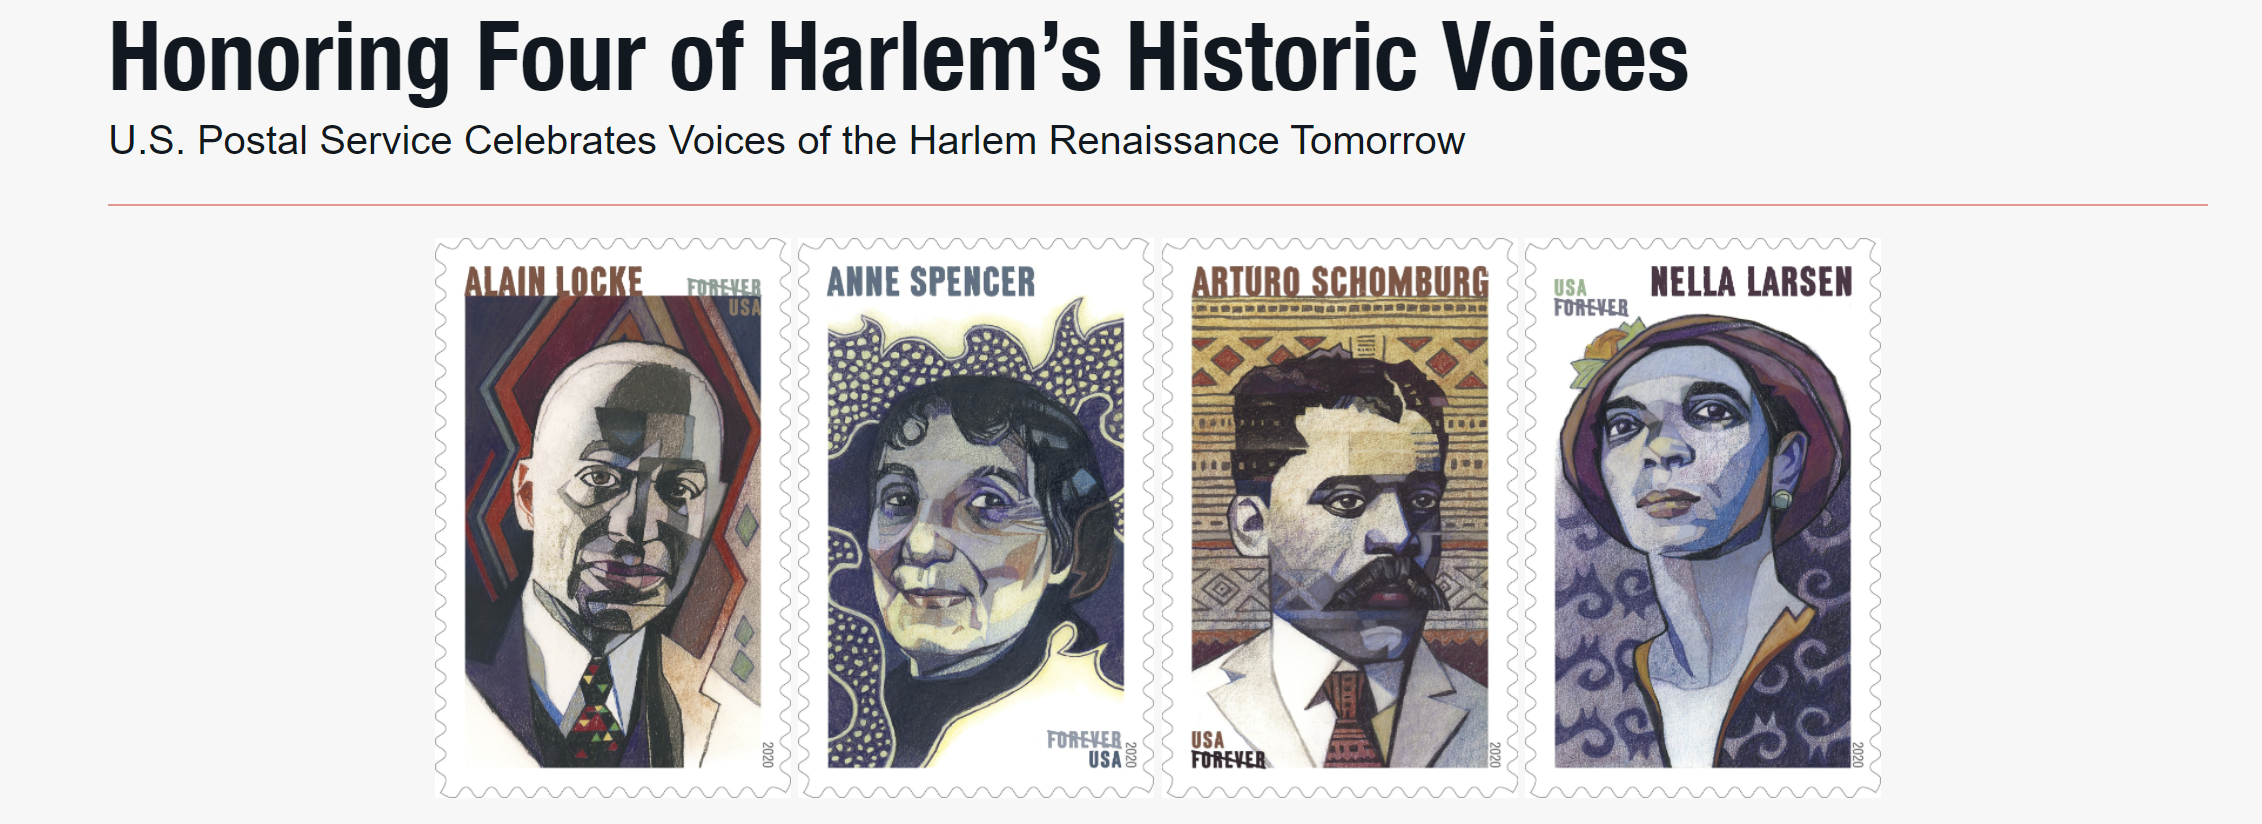 Honoring Four of Harlem’s Historic Voices